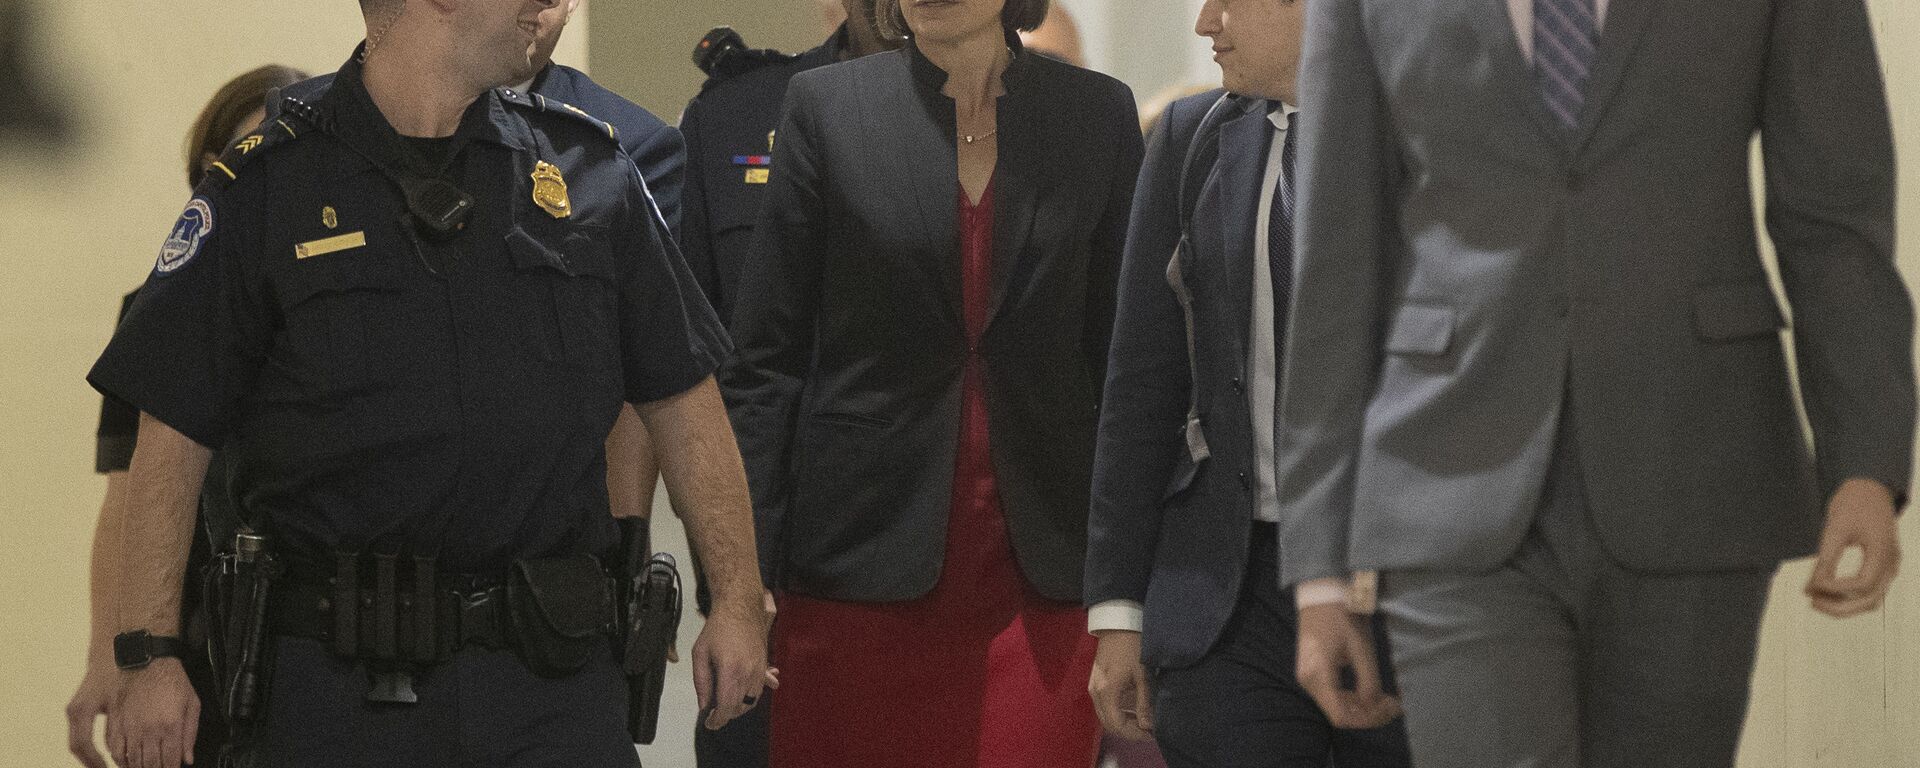 Former White House advisor on Russia, Fiona Hill, leaves Capitol Hill in Washington, Monday, Oct. 14, 2019, after testifying before congressional lawmakers as part of the House impeachment inquiry into President Donald Trump. (AP Photo/Manuel Balce Ceneta) - Sputnik International, 1920, 17.02.2023